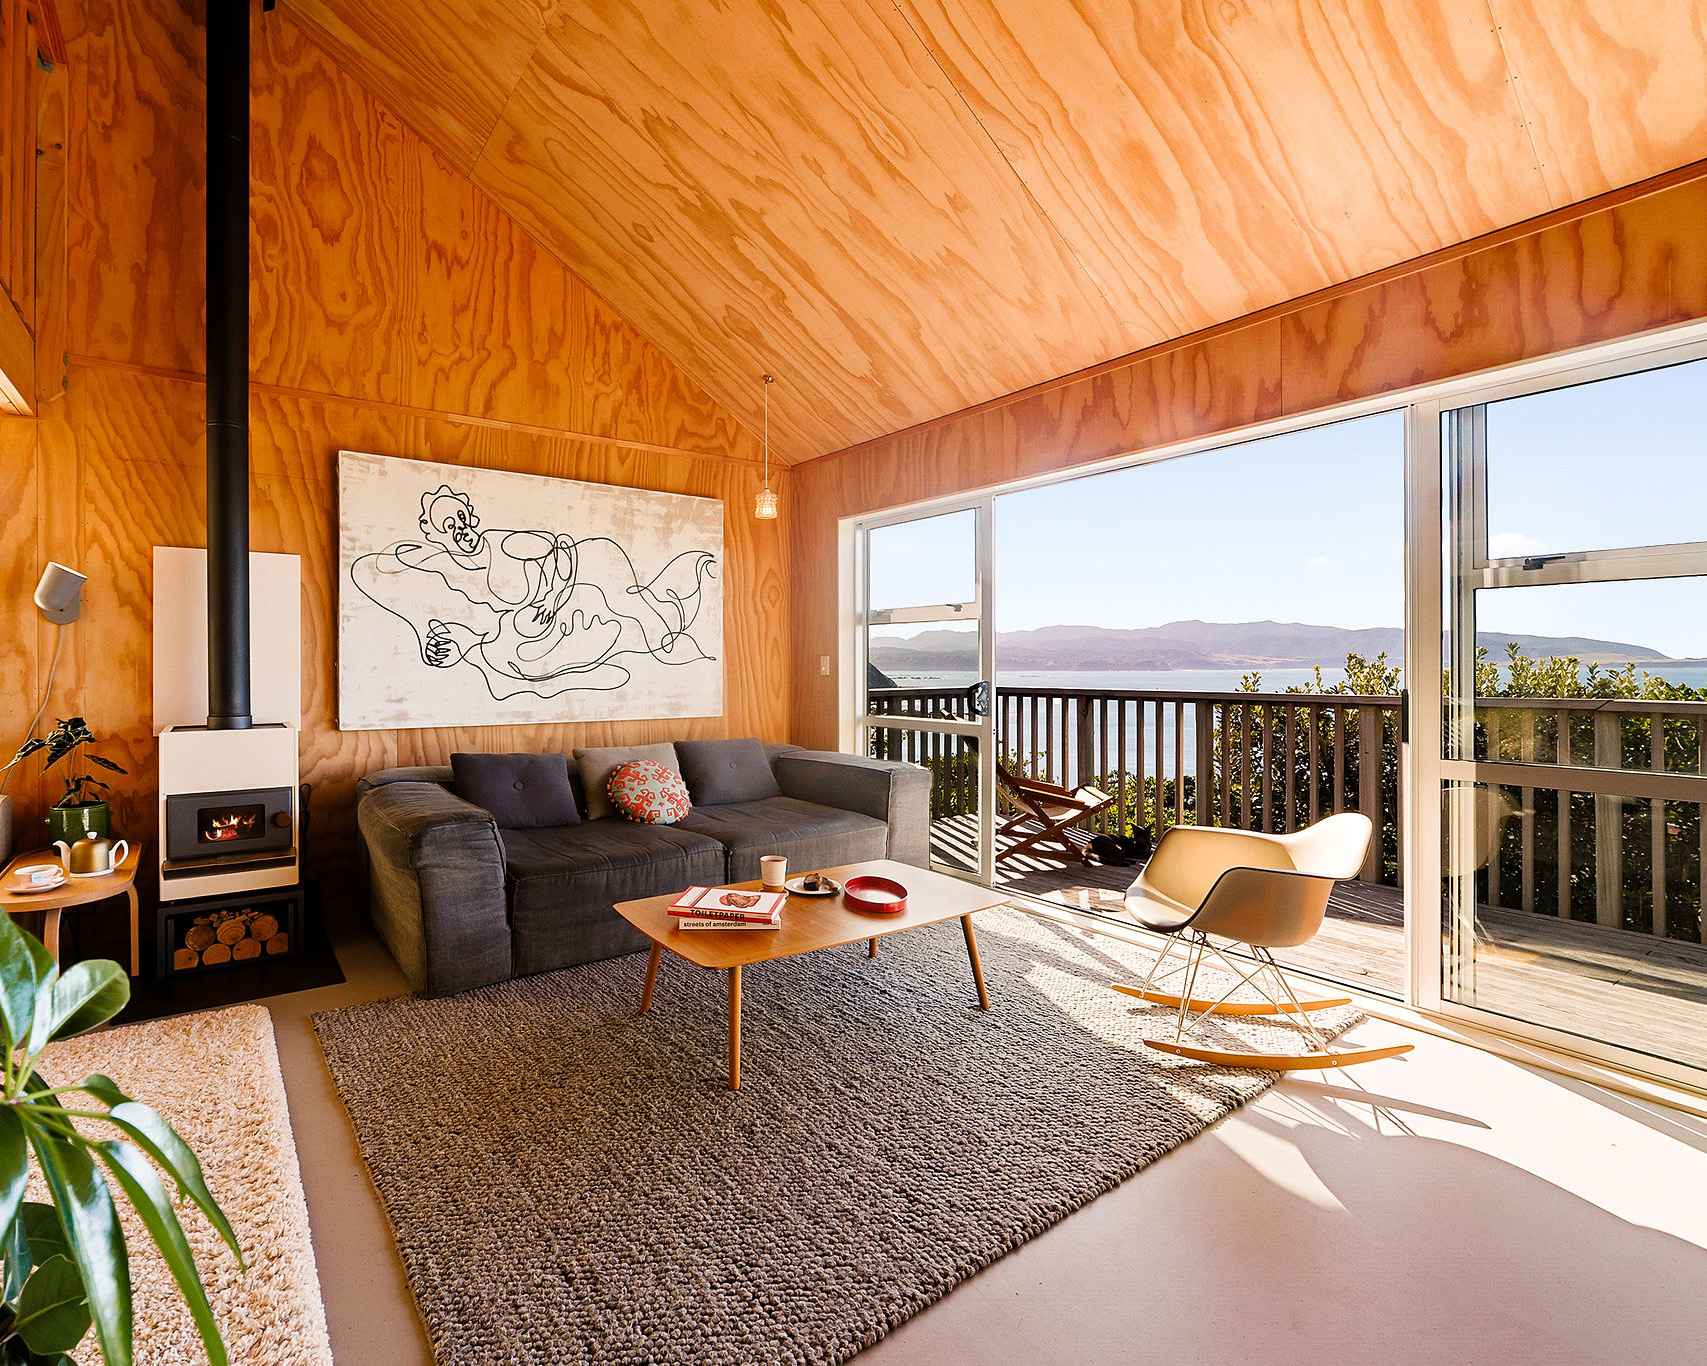 Warm wooden interiors of Hygge Hus retreat, with high ceilings, a fireplace, unique artworks and a large balcony overlooking the ocean.